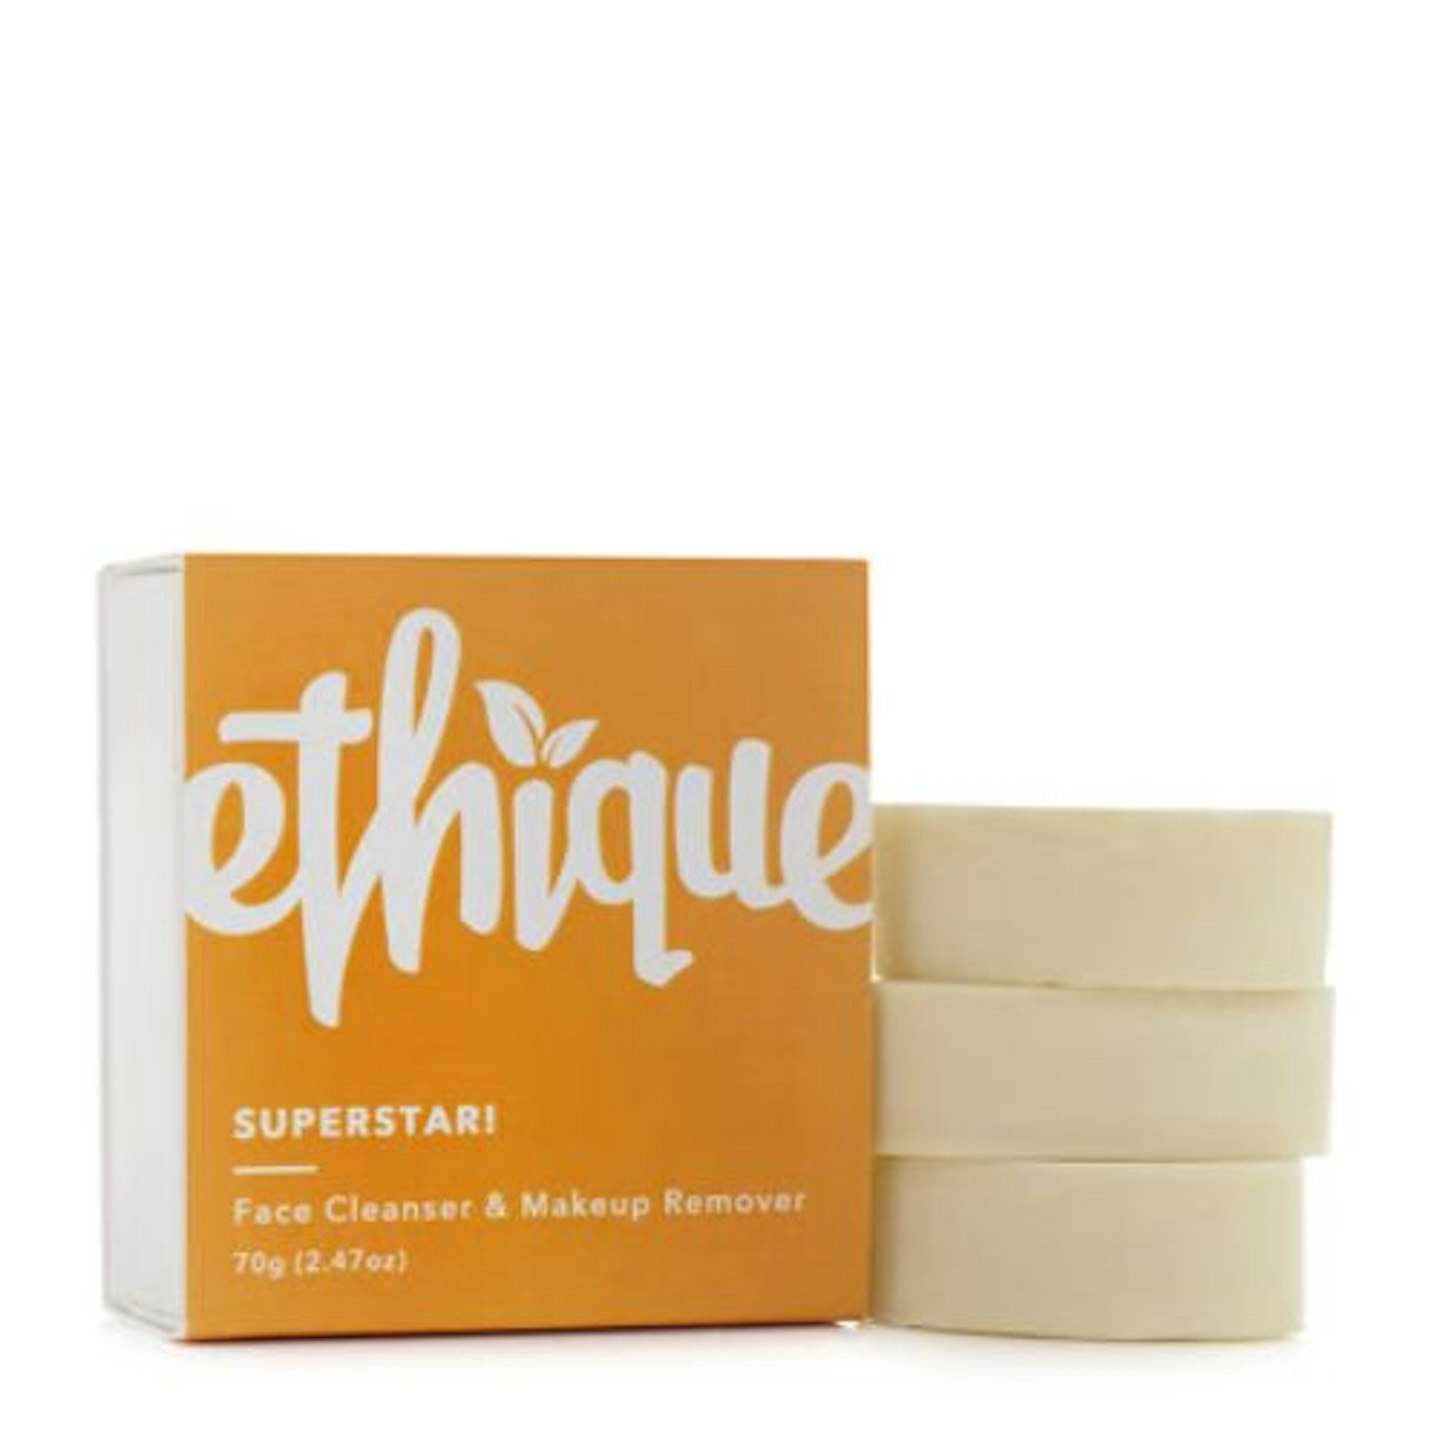 Ethique Superstar! Cleansing Balm And Makeup Remover